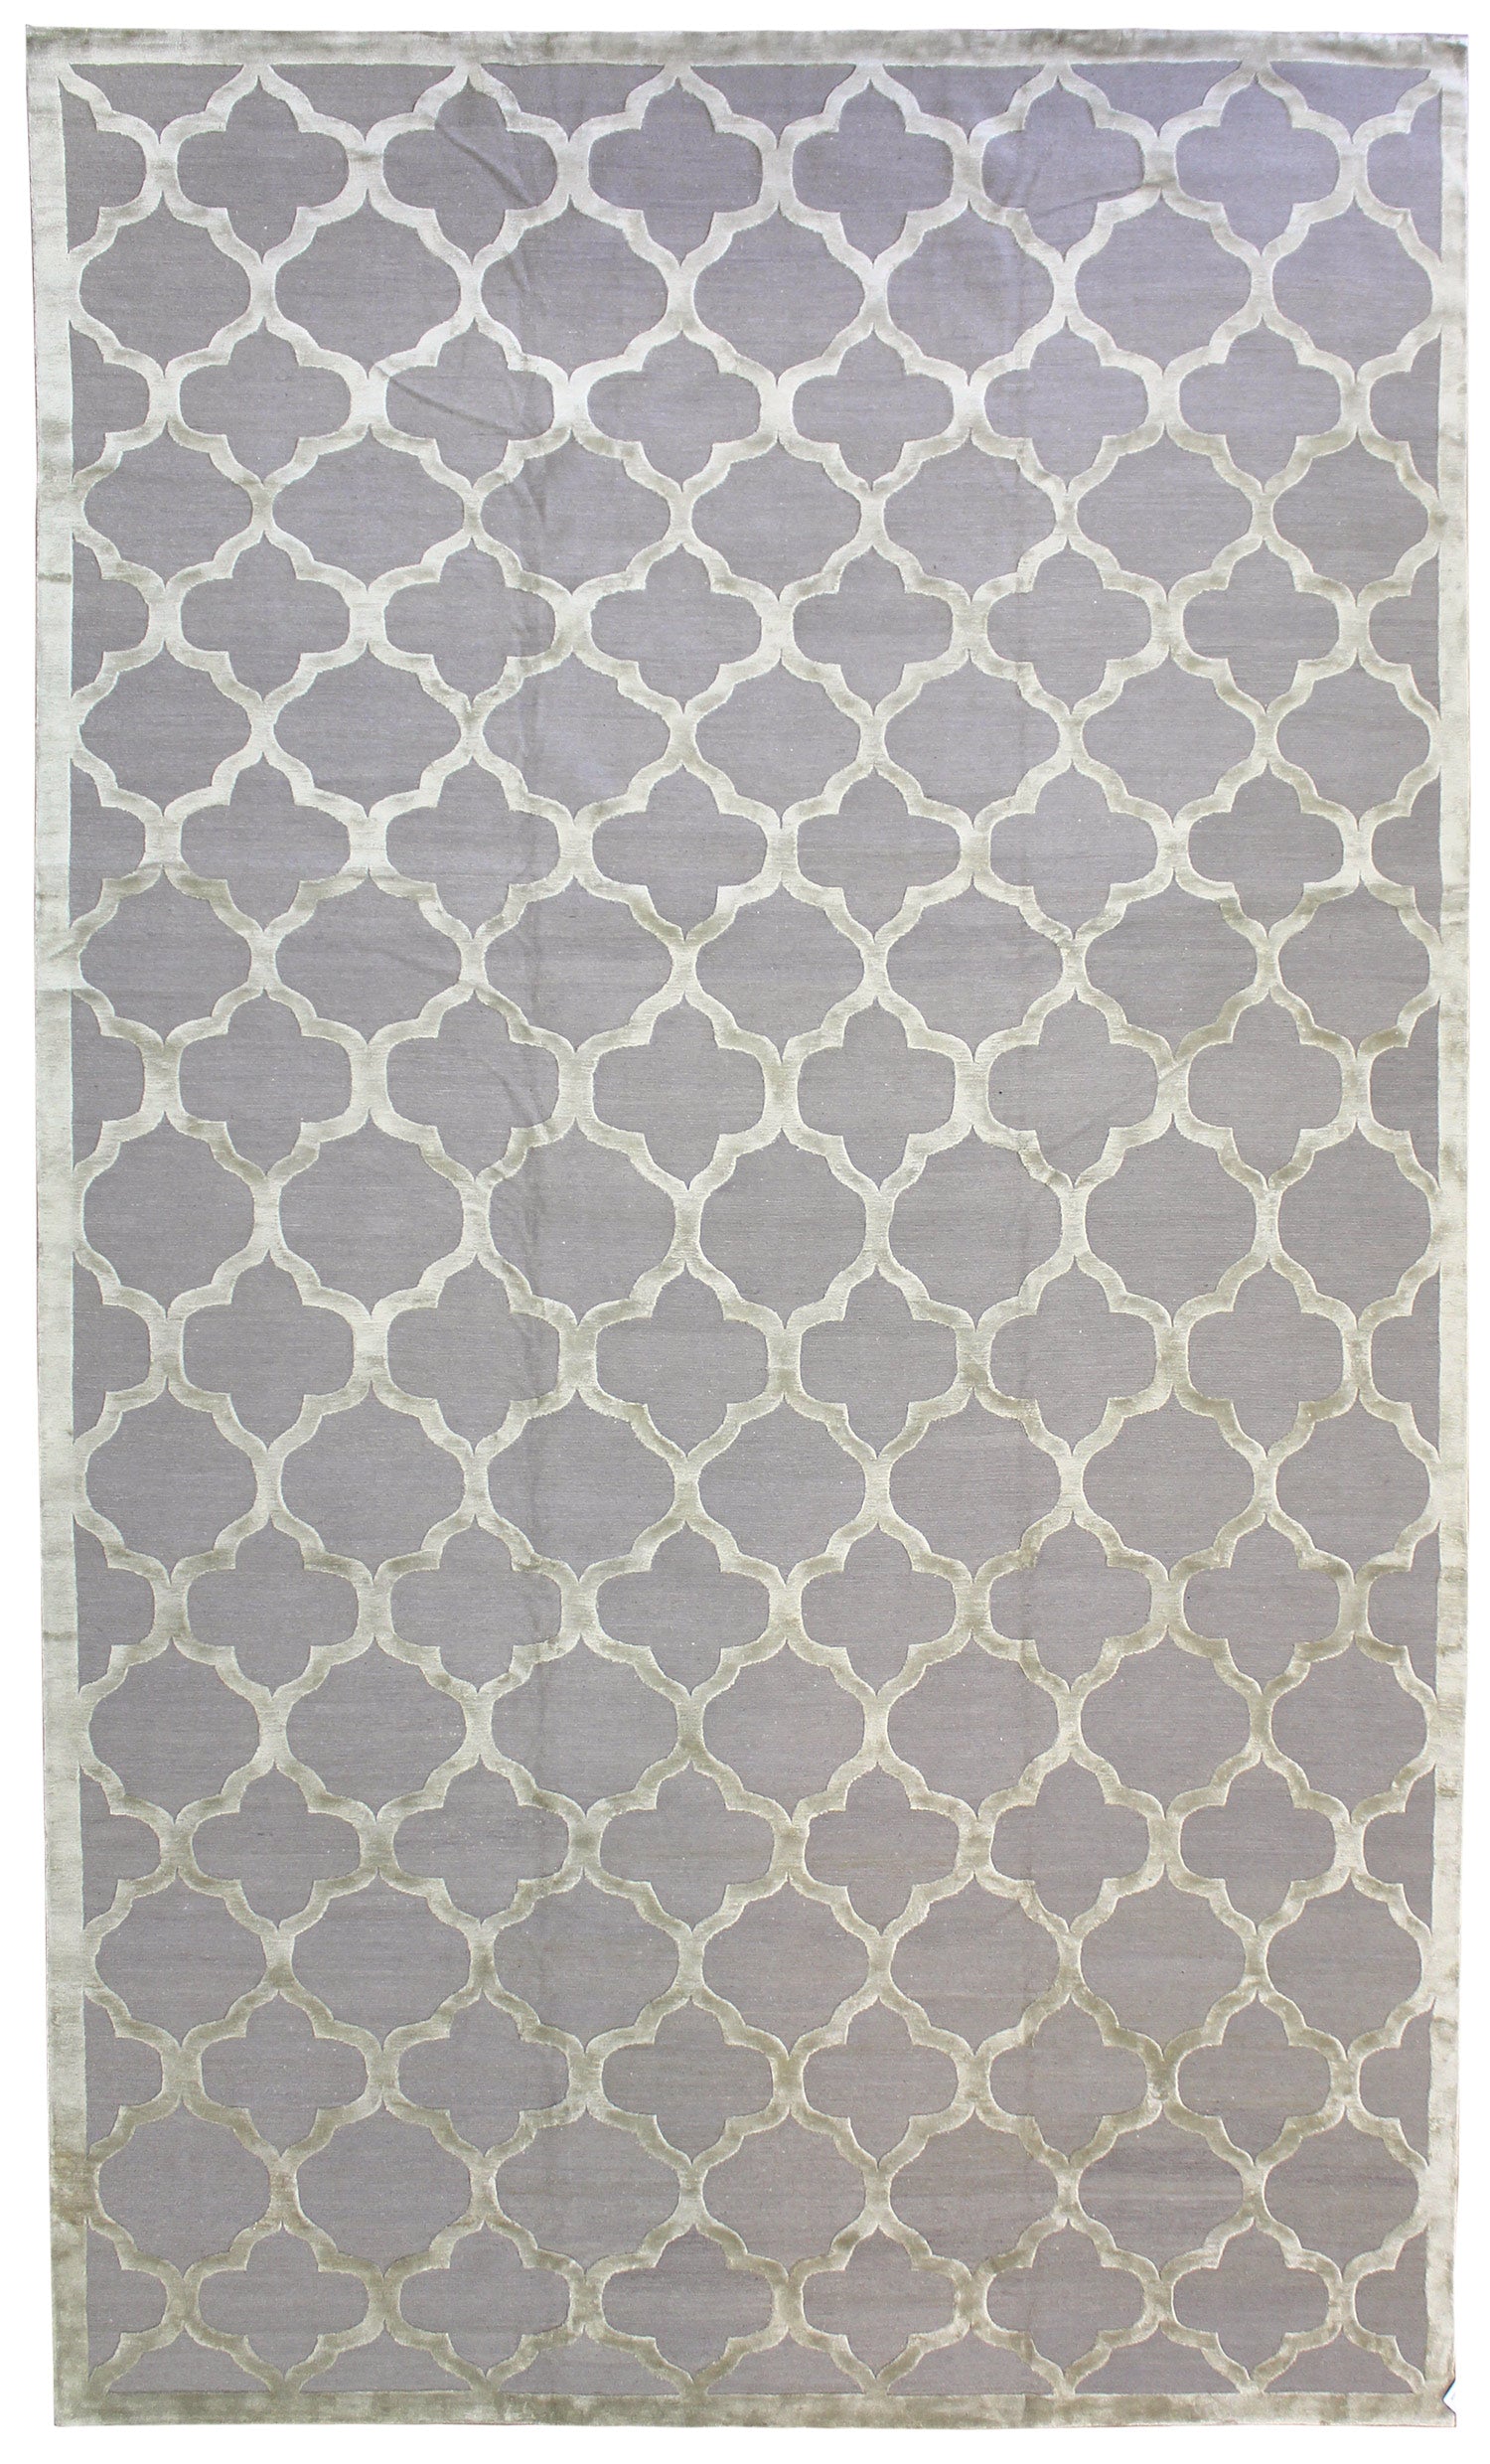 Gothic Handwoven Transitional Rug